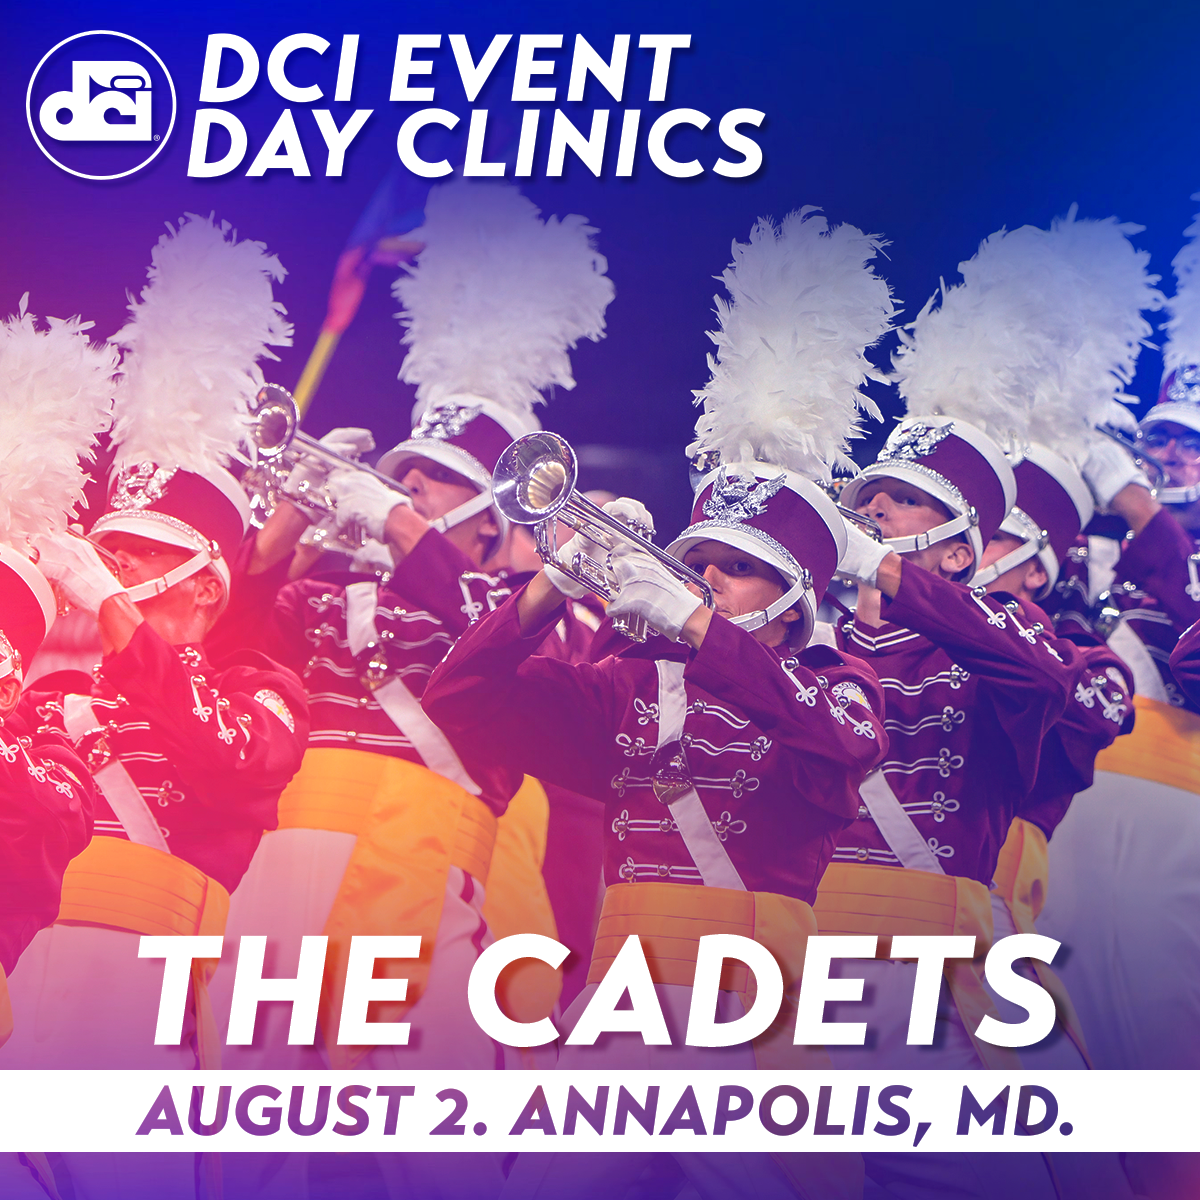 DCI Event Day Clinic The Cadets A World Champion Drum Corps